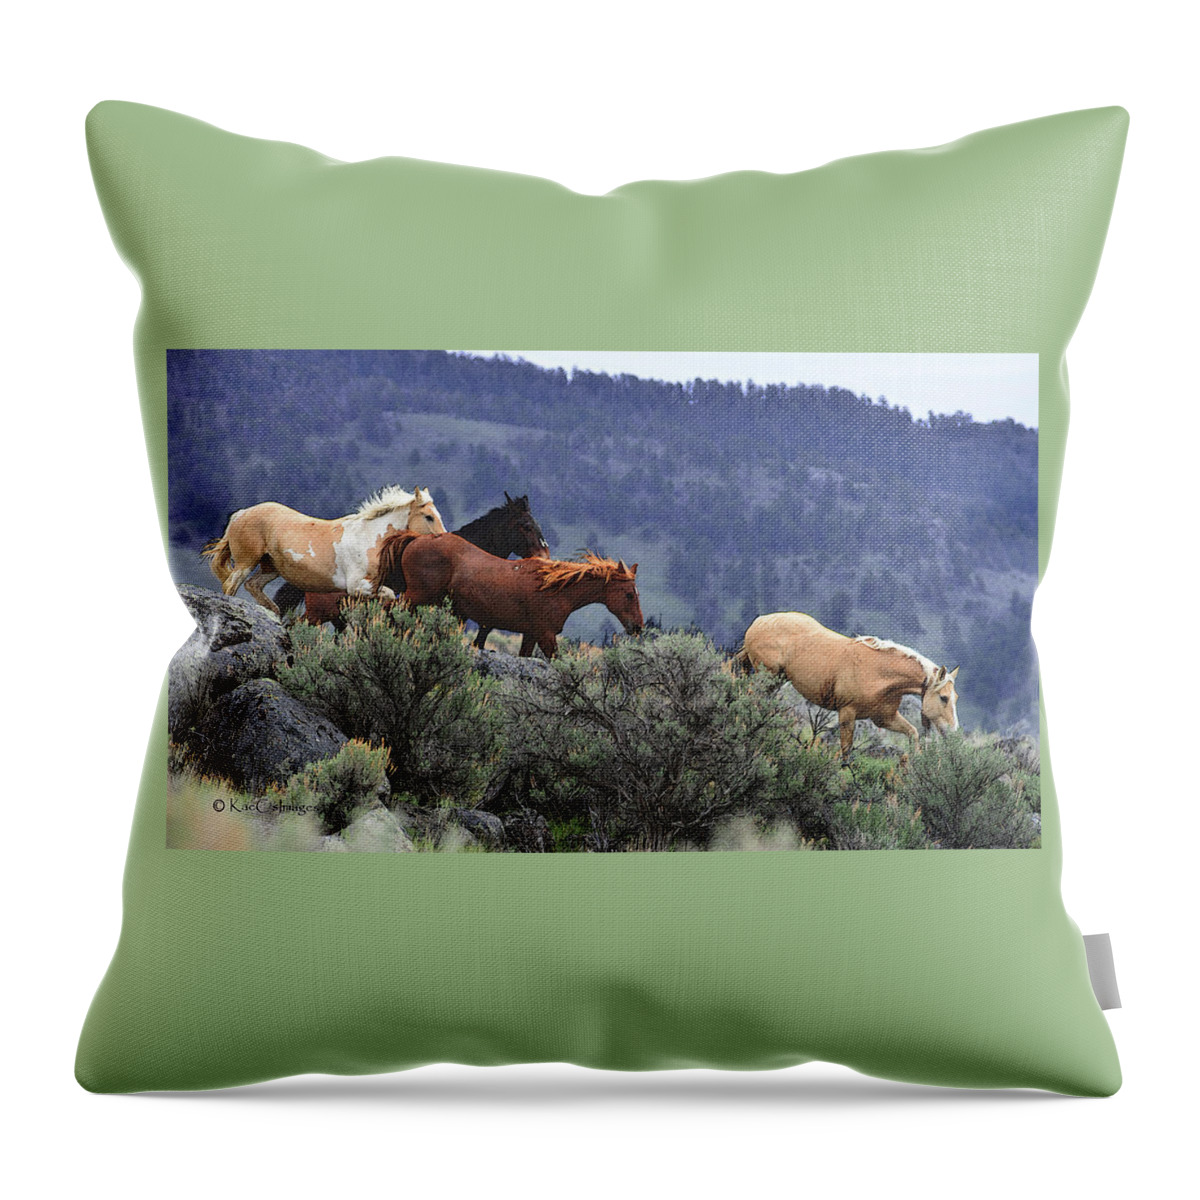 Equines Throw Pillow featuring the photograph Horses On A Downhill Run by Kae Cheatham